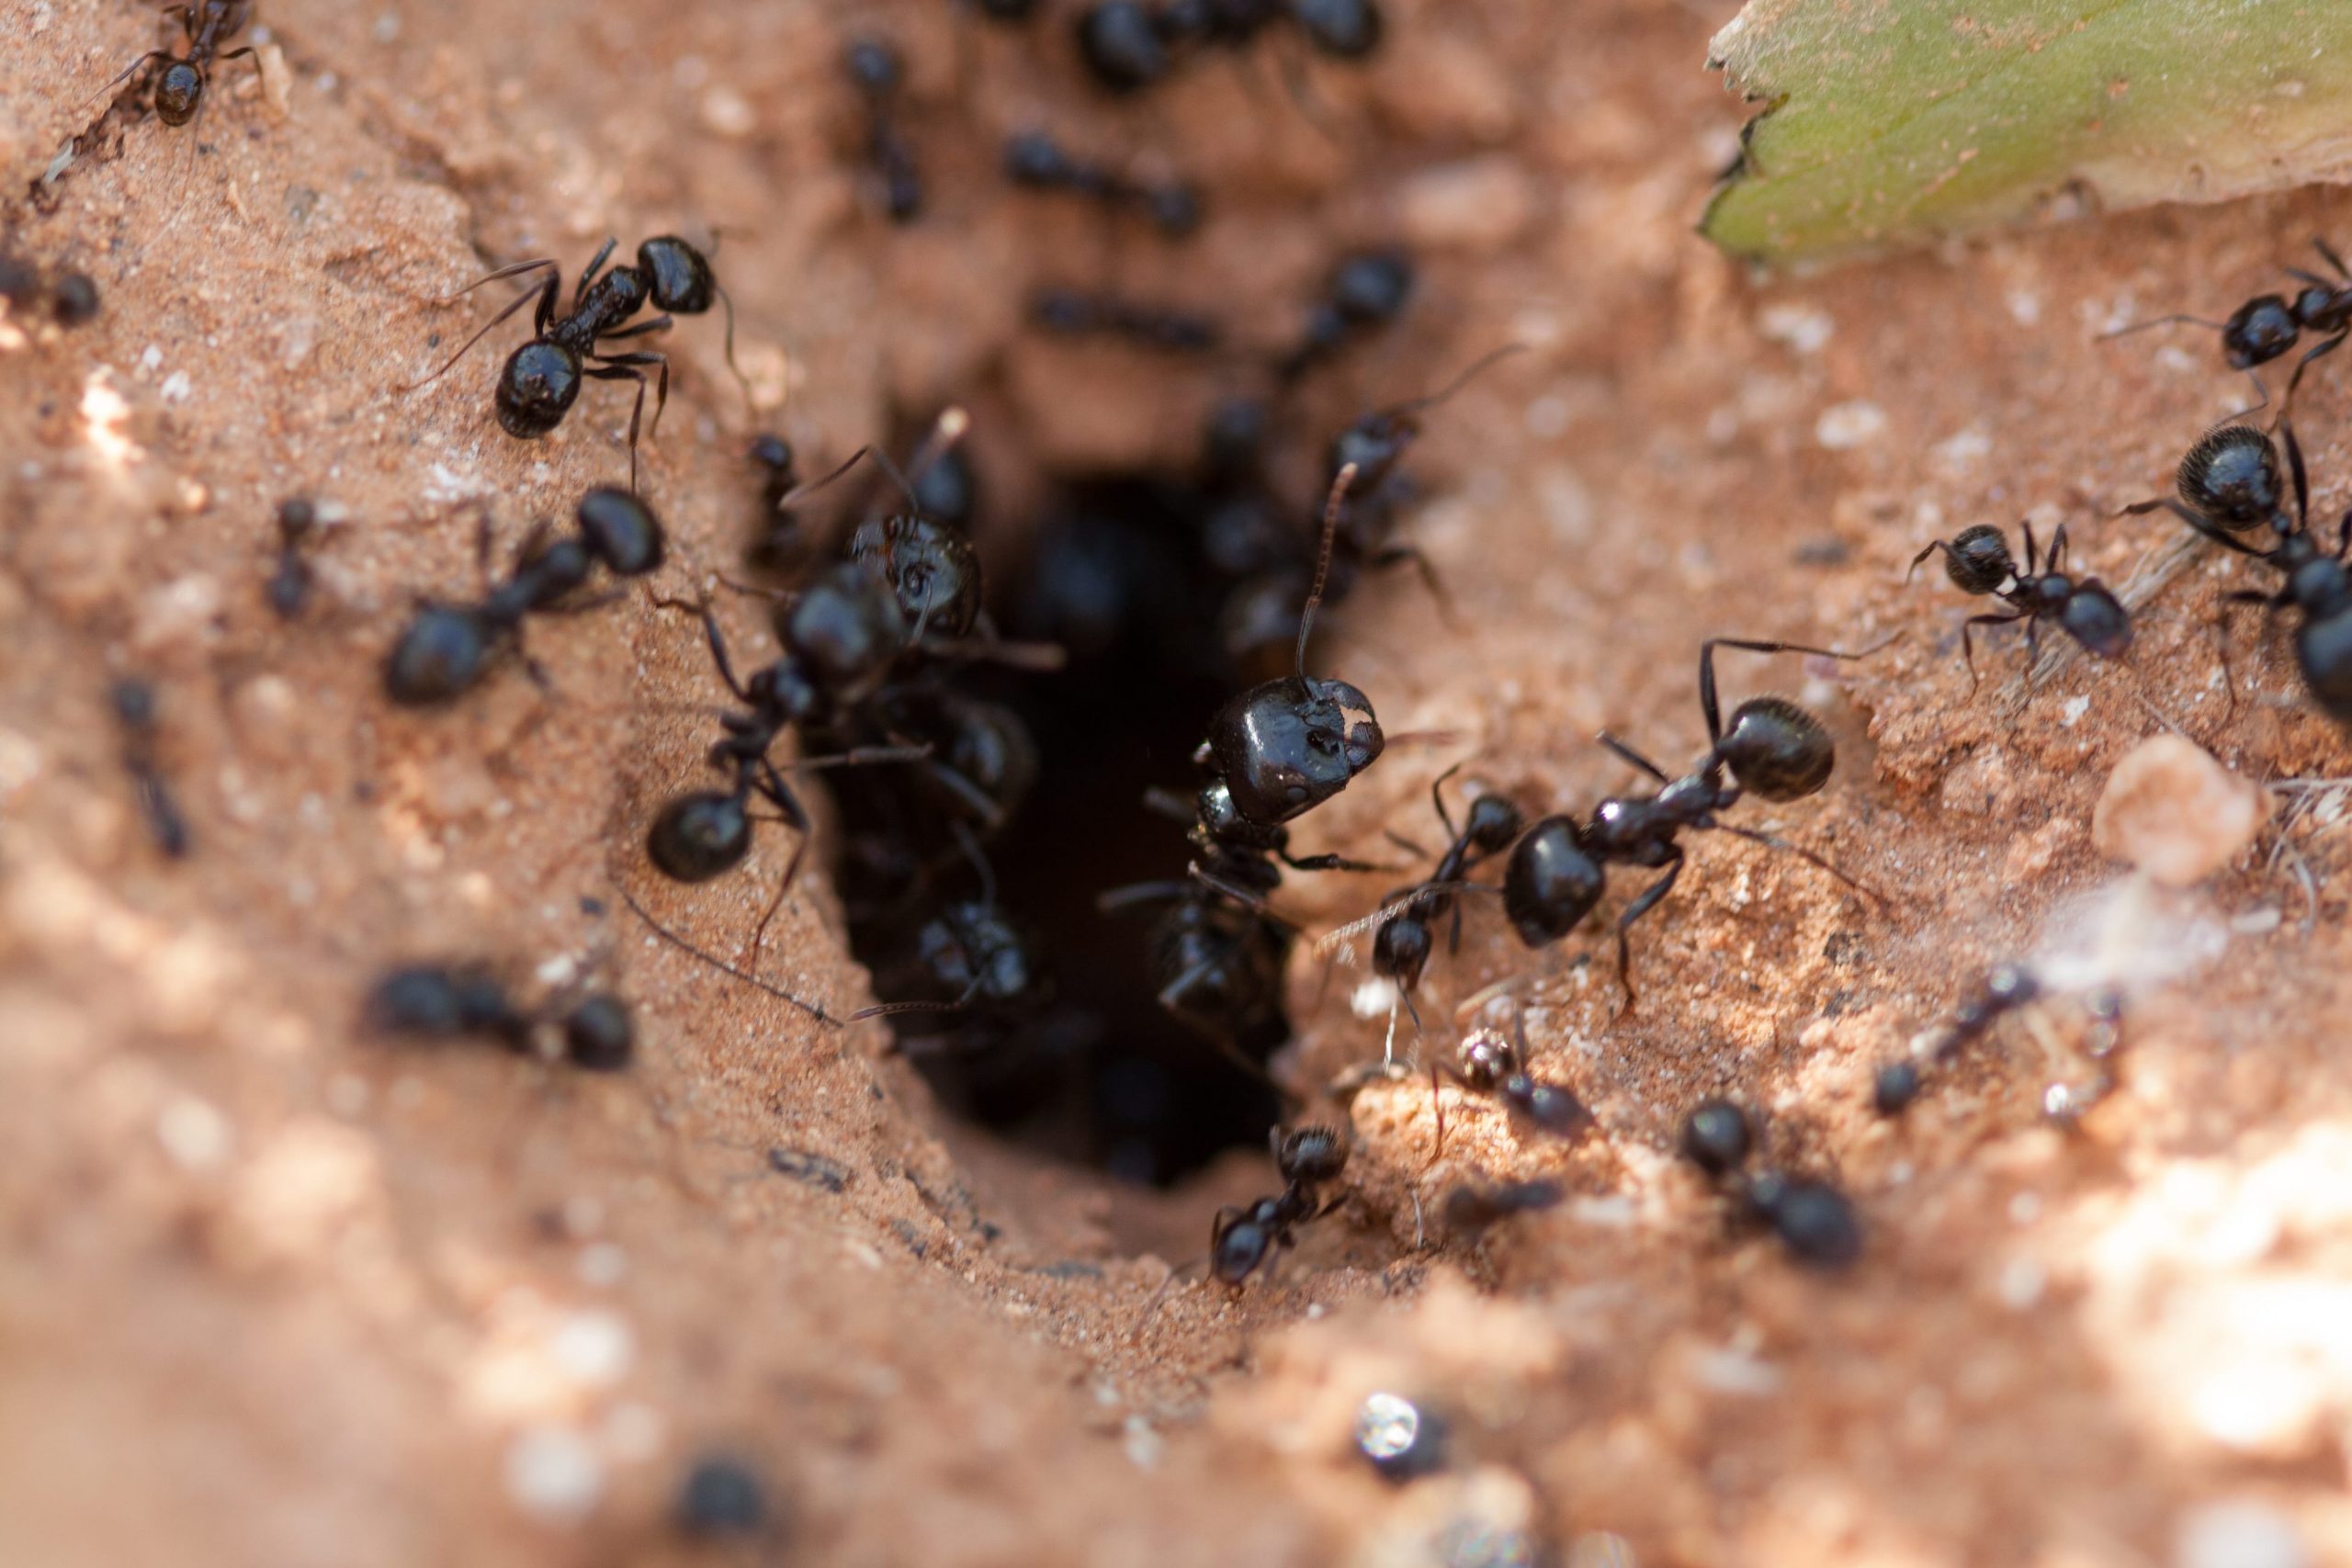 Ants entering an ant mound.